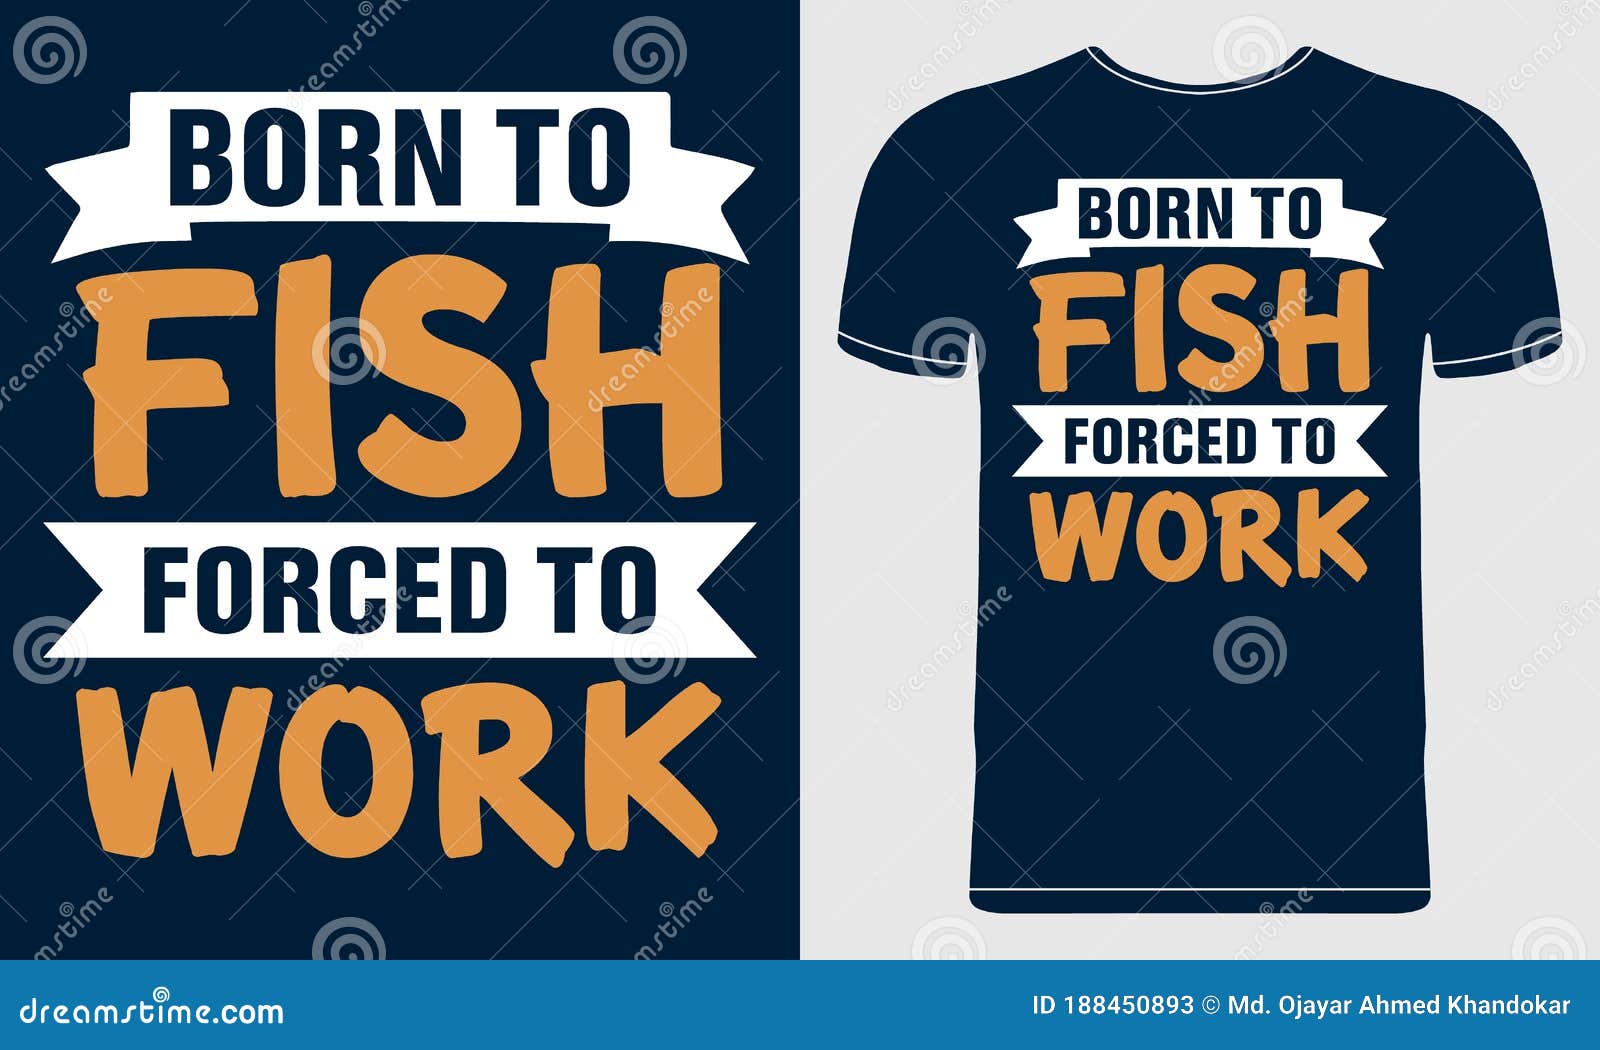 Born To Fish Forced To Work. Vector Illustration Quotes on Blue